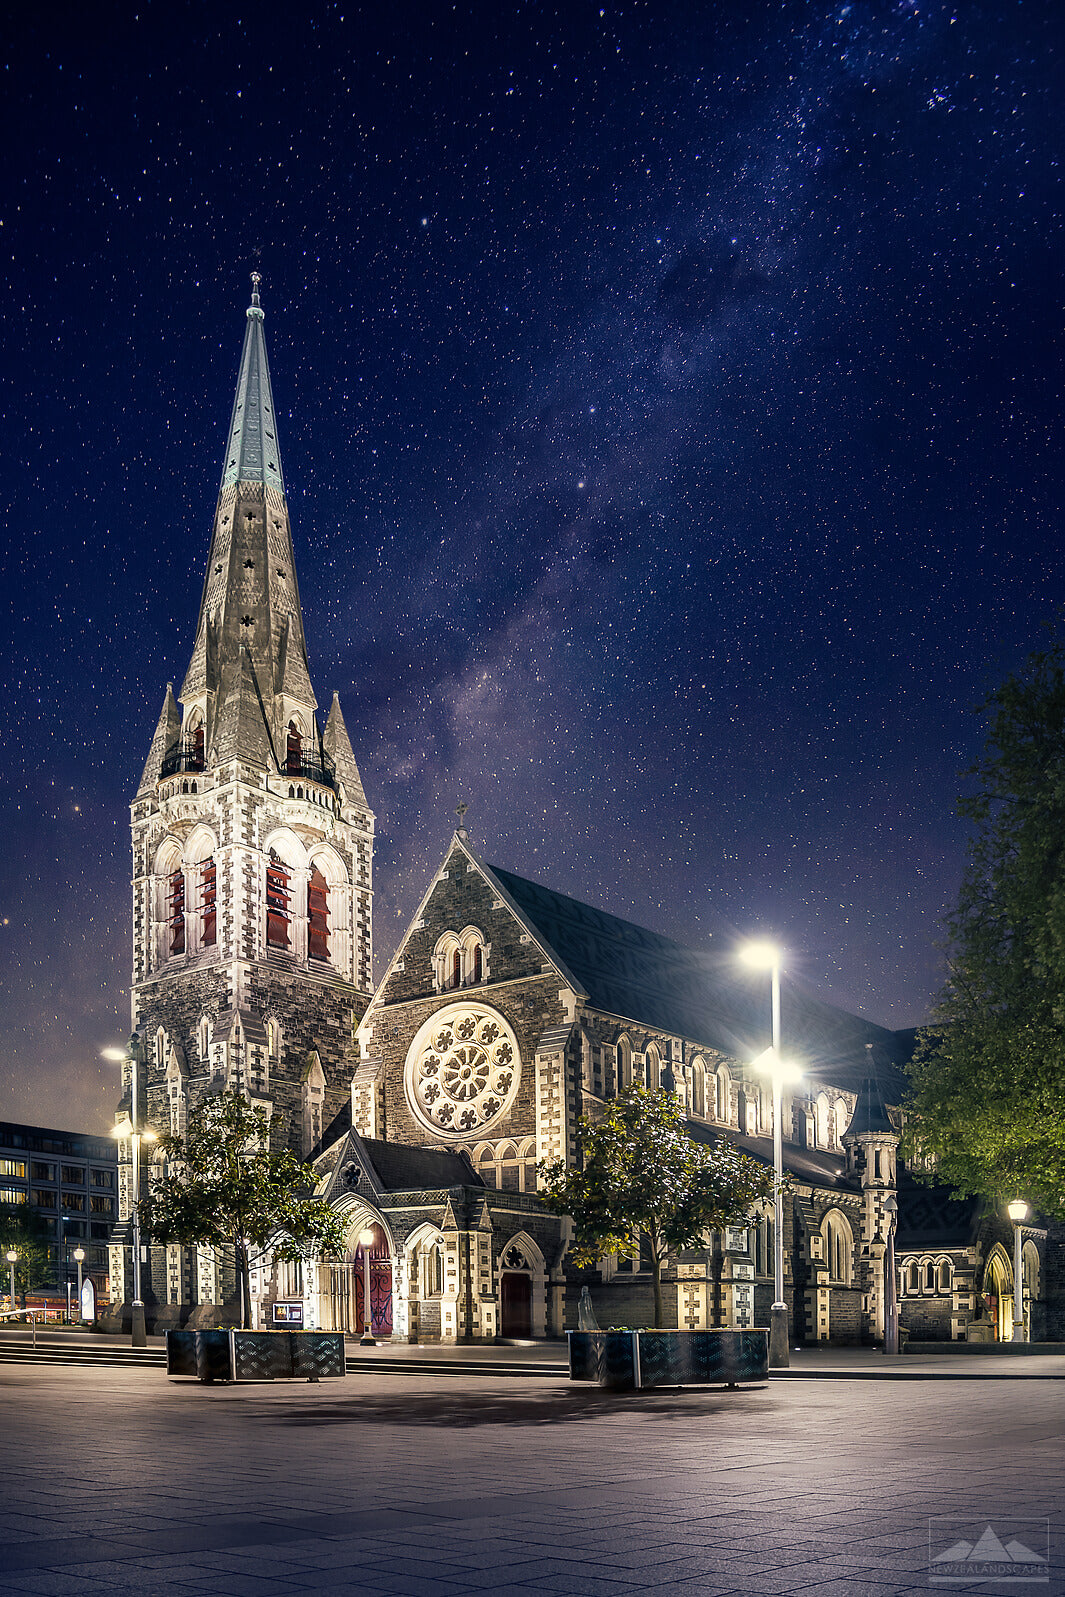 Night time photo of Christchurch Cathedral pre-earthquake, with stars lit up in the sky